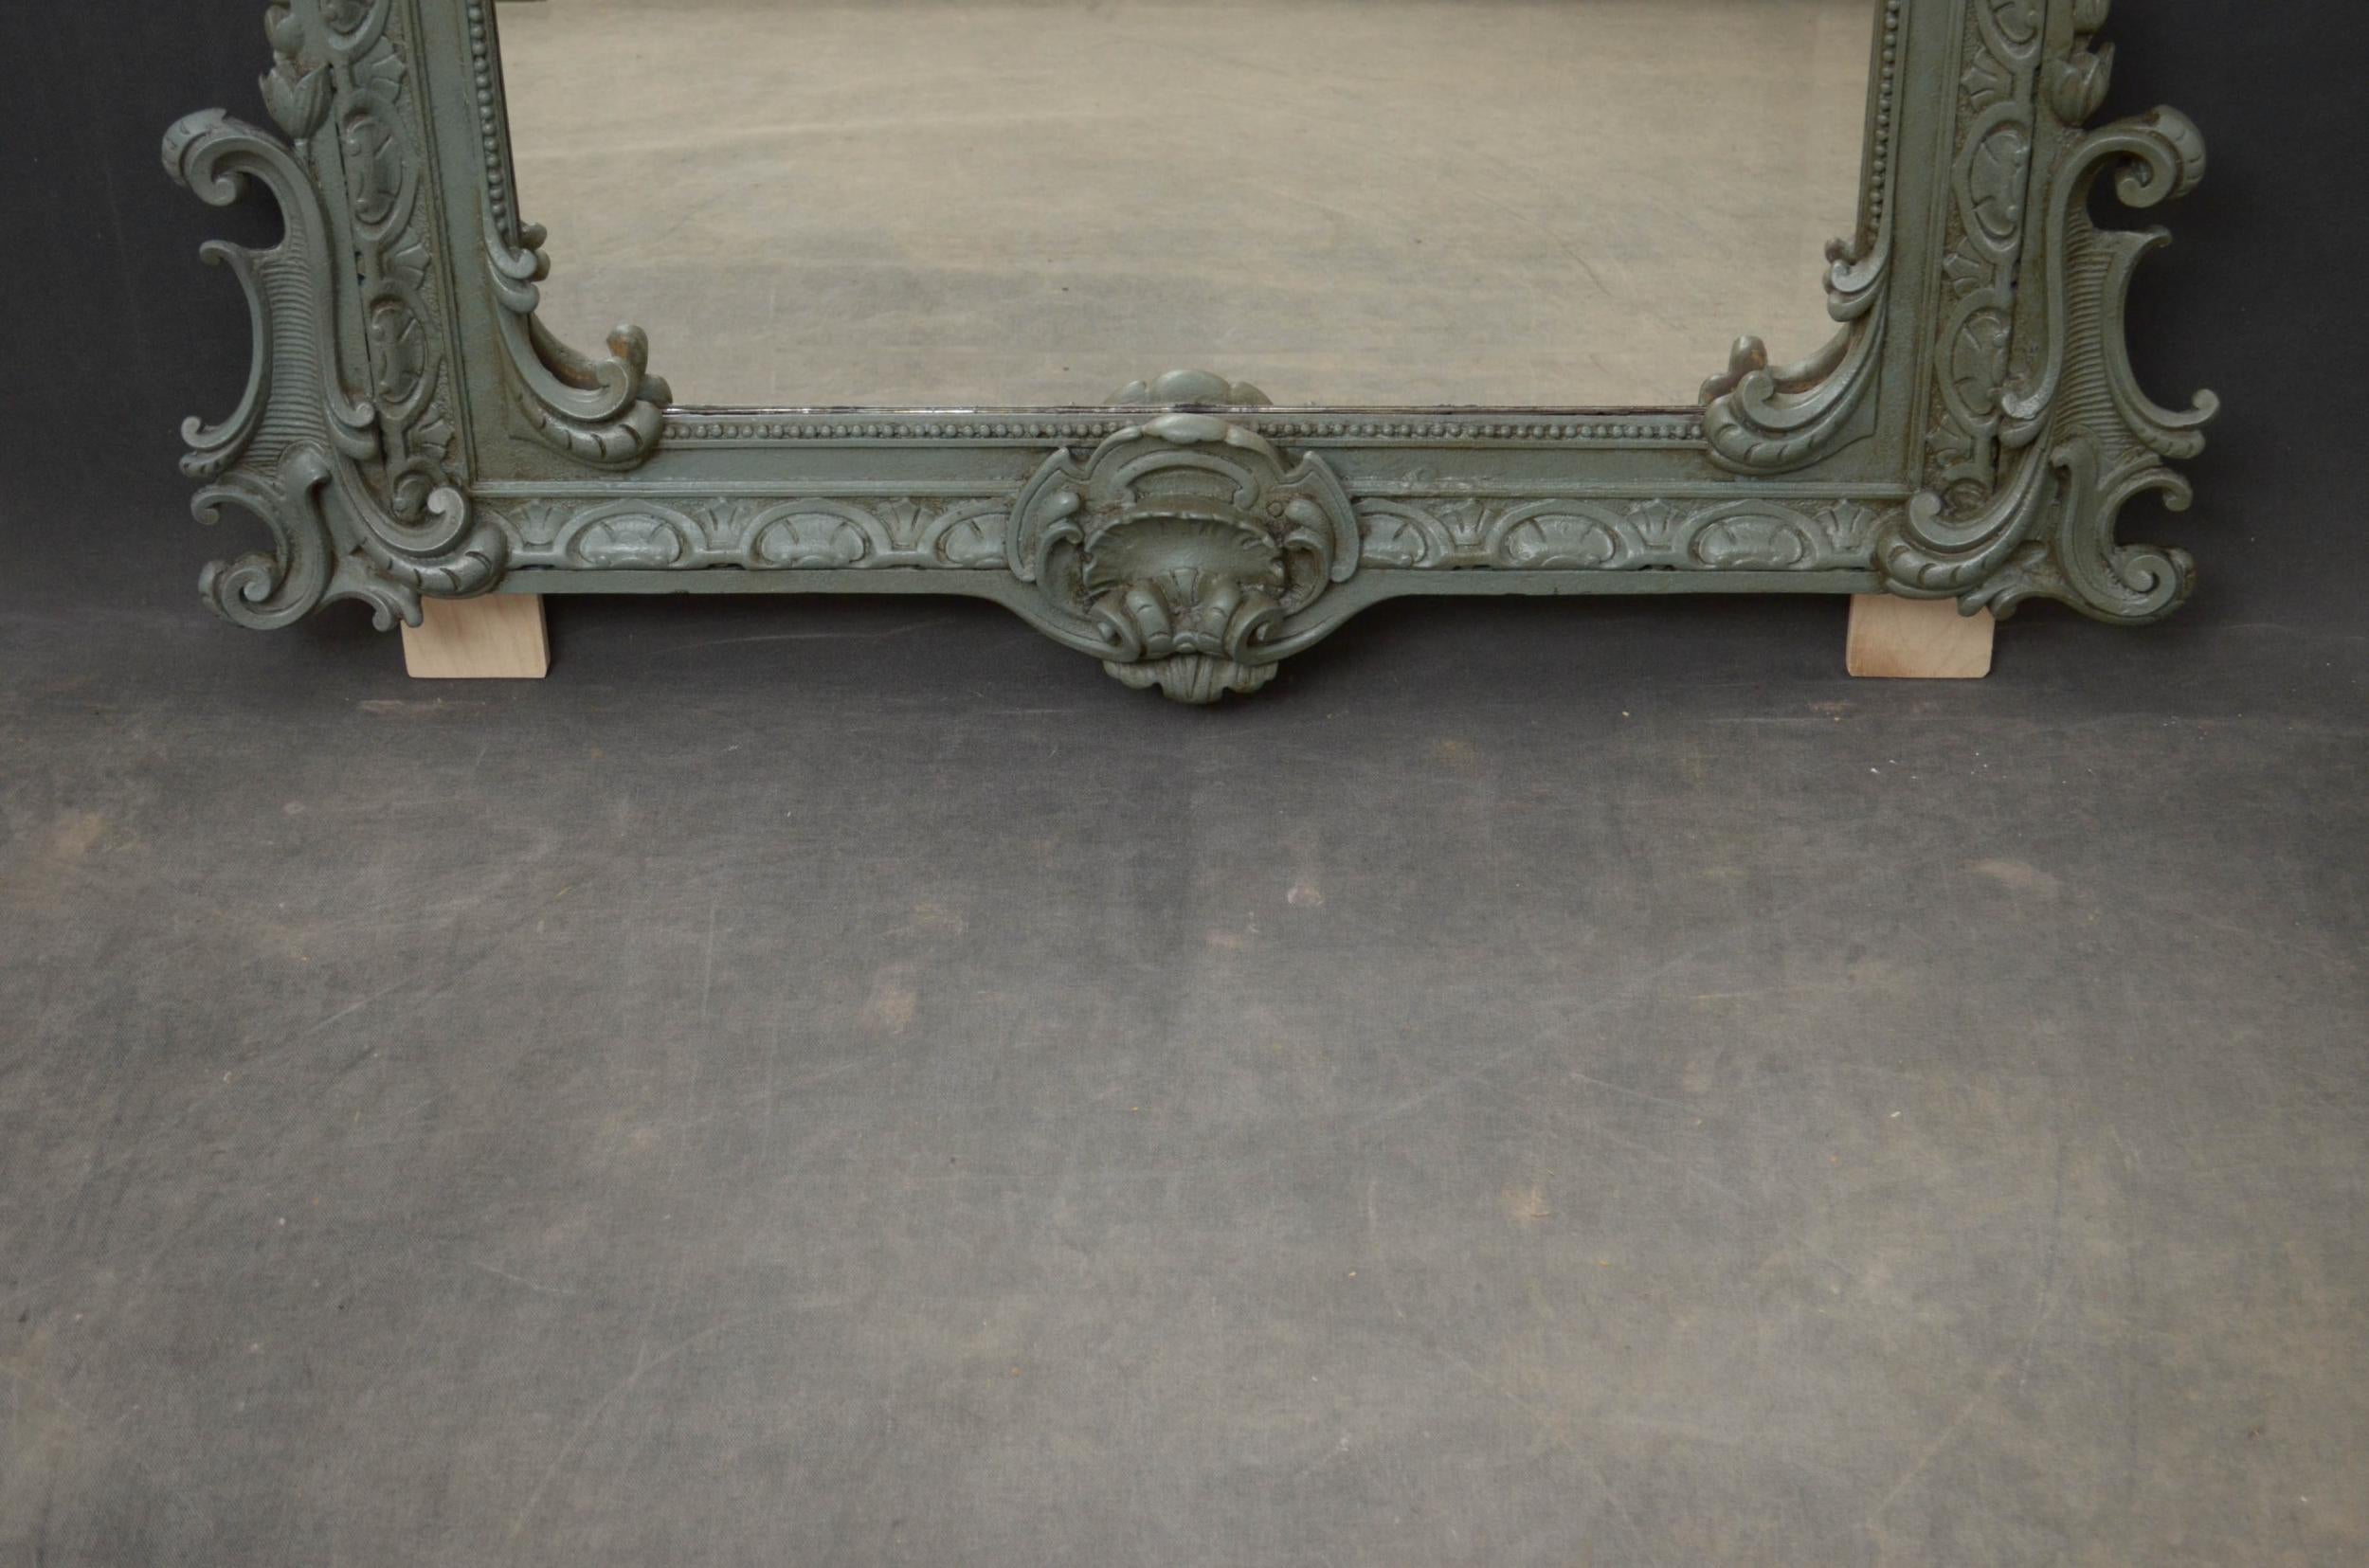 Sn4977 A 19th century Continental wall mirror, having original bevelled edge glass with some imperfections in finely carved painted frame with centre crest and scrolls to the top and base. This antique mirror retains its original glass and original